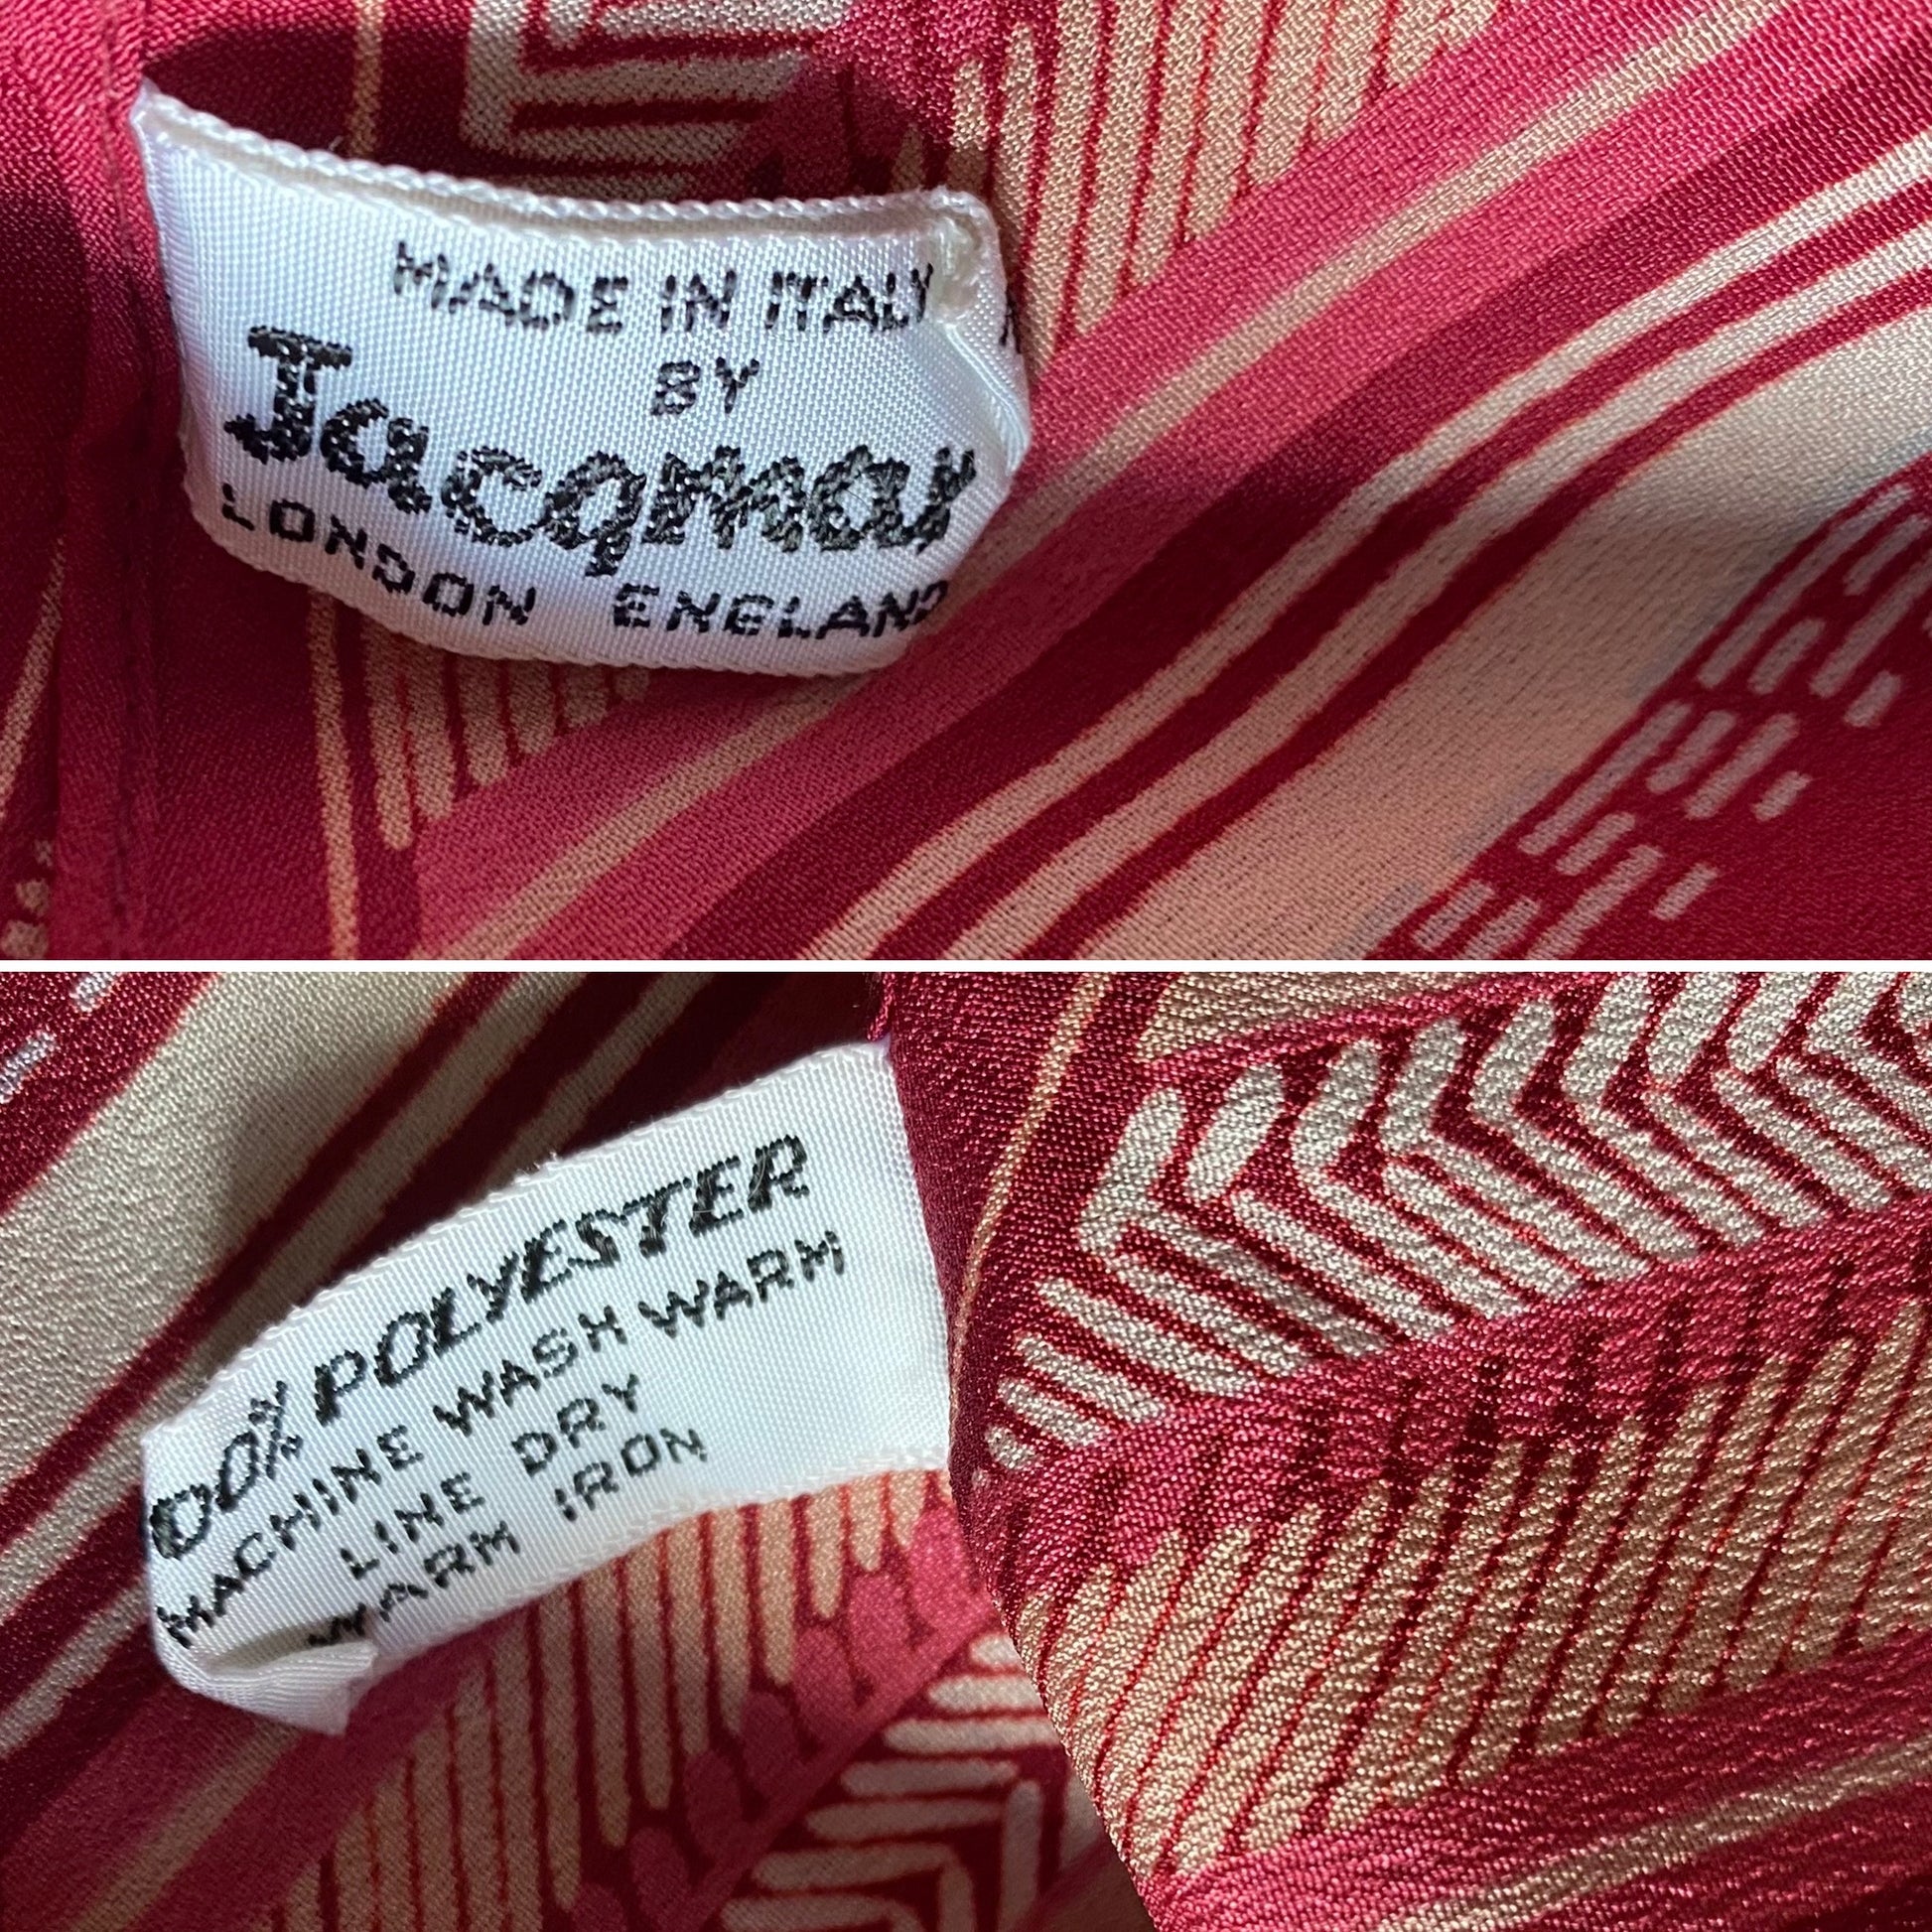 Long 70s Jacqmar brand scarf for hair or neck - Perfect for adding a touch of elegance to your hairstyle.